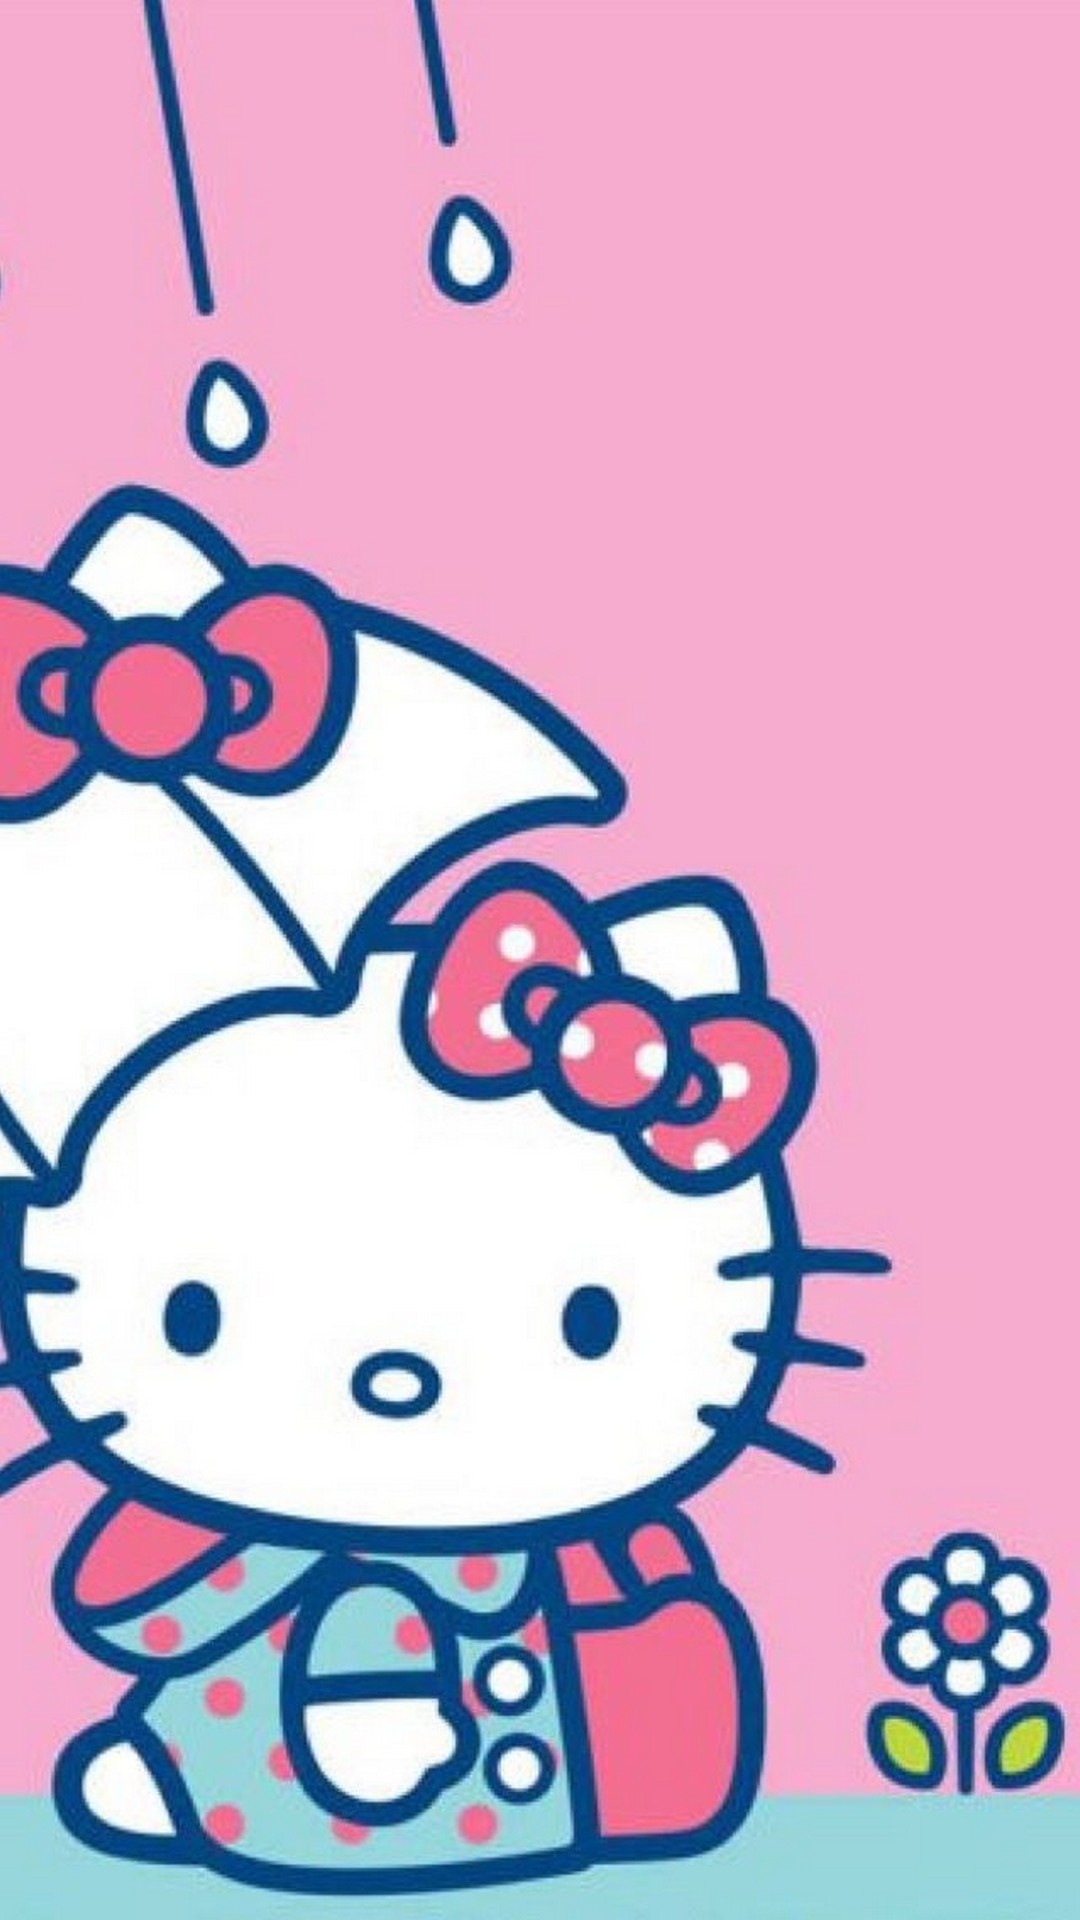 Hello Kitty Wallpaper For Mobile Android With Resolution 1080X1920 pixel. You can make this wallpaper for your Desktop Computer Backgrounds, Mac Wallpapers, Android Lock screen or iPhone Screensavers